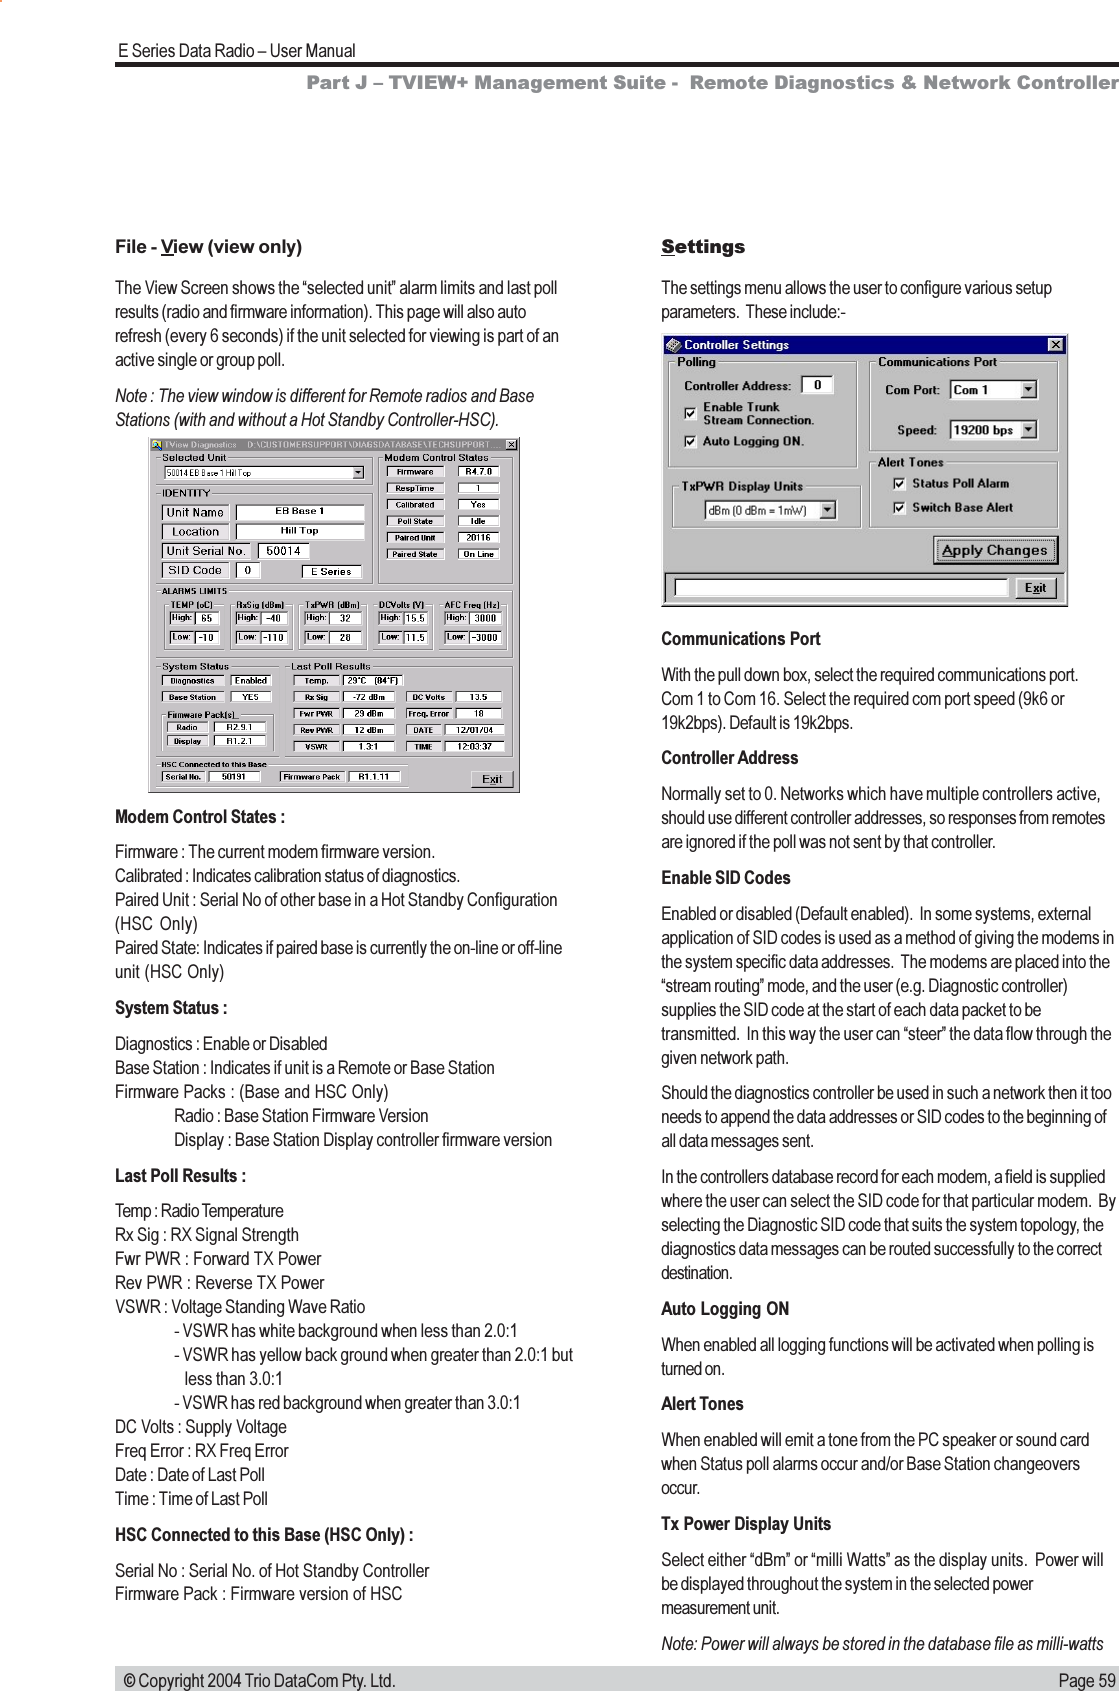 Page 59E Series Data Radio  User Manual © Copyright 2004 Trio DataCom Pty. Ltd.File - View (view only)The View Screen shows the selected unit alarm limits and last pollresults (radio and firmware information). This page will also autorefresh (every 6 seconds) if the unit selected for viewing is part of anactive single or group poll.Note : The view window is different for Remote radios and BaseStations (with and without a Hot Standby Controller-HSC).SettingsThe settings menu allows the user to configure various setupparameters.  These include:-Communications PortWith the pull down box, select the required communications port.Com 1 to Com 16. Select the required com port speed (9k6 or19k2bps). Default is 19k2bps.Controller AddressNormally set to 0. Networks which have multiple controllers active,should use different controller addresses, so responses from remotesare ignored if the poll was not sent by that controller.Enable SID CodesEnabled or disabled (Default enabled).  In some systems, externalapplication of SID codes is used as a method of giving the modems inthe system specific data addresses.  The modems are placed into thestream routing mode, and the user (e.g. Diagnostic controller)supplies the SID code at the start of each data packet to betransmitted.  In this way the user can steer the data flow through thegiven network path.Should the diagnostics controller be used in such a network then it tooneeds to append the data addresses or SID codes to the beginning ofall data messages sent.In the controllers database record for each modem, a field is suppliedwhere the user can select the SID code for that particular modem.  Byselecting the Diagnostic SID code that suits the system topology, thediagnostics data messages can be routed successfully to the correctdestination.Auto Logging ONWhen enabled all logging functions will be activated when polling isturned on.Alert TonesWhen enabled will emit a tone from the PC speaker or sound cardwhen Status poll alarms occur and/or Base Station changeoversoccur.Tx Power Display UnitsSelect either dBm or milli Watts as the display units.  Power willbe displayed throughout the system in the selected powermeasurement unit.Note: Power will always be stored in the database file as milli-wattsPart J  TVIEW+ Management Suite -  Remote Diagnostics &amp; Network ControllerModem Control States :Firmware : The current modem firmware version.Calibrated : Indicates calibration status of diagnostics.Paired Unit : Serial No of other base in a Hot Standby Configuration(HSC Only)Paired State: Indicates if paired base is currently the on-line or off-lineunit (HSC Only)System Status :Diagnostics : Enable or DisabledBase Station : Indicates if unit is a Remote or Base StationFirmware Packs : (Base and HSC Only)Radio : Base Station Firmware VersionDisplay : Base Station Display controller firmware versionLast Poll Results :Temp : Radio TemperatureRx Sig : RX Signal StrengthFwr PWR : Forward TX PowerRev PWR : Reverse TX PowerVSWR : Voltage Standing Wave Ratio- VSWR has white background when less than 2.0:1- VSWR has yellow back ground when greater than 2.0:1 but   less than 3.0:1- VSWR has red background when greater than 3.0:1DC Volts : Supply VoltageFreq Error : RX Freq ErrorDate : Date of Last PollTime : Time of Last PollHSC Connected to this Base (HSC Only) :Serial No : Serial No. of Hot Standby ControllerFirmware Pack : Firmware version of HSC